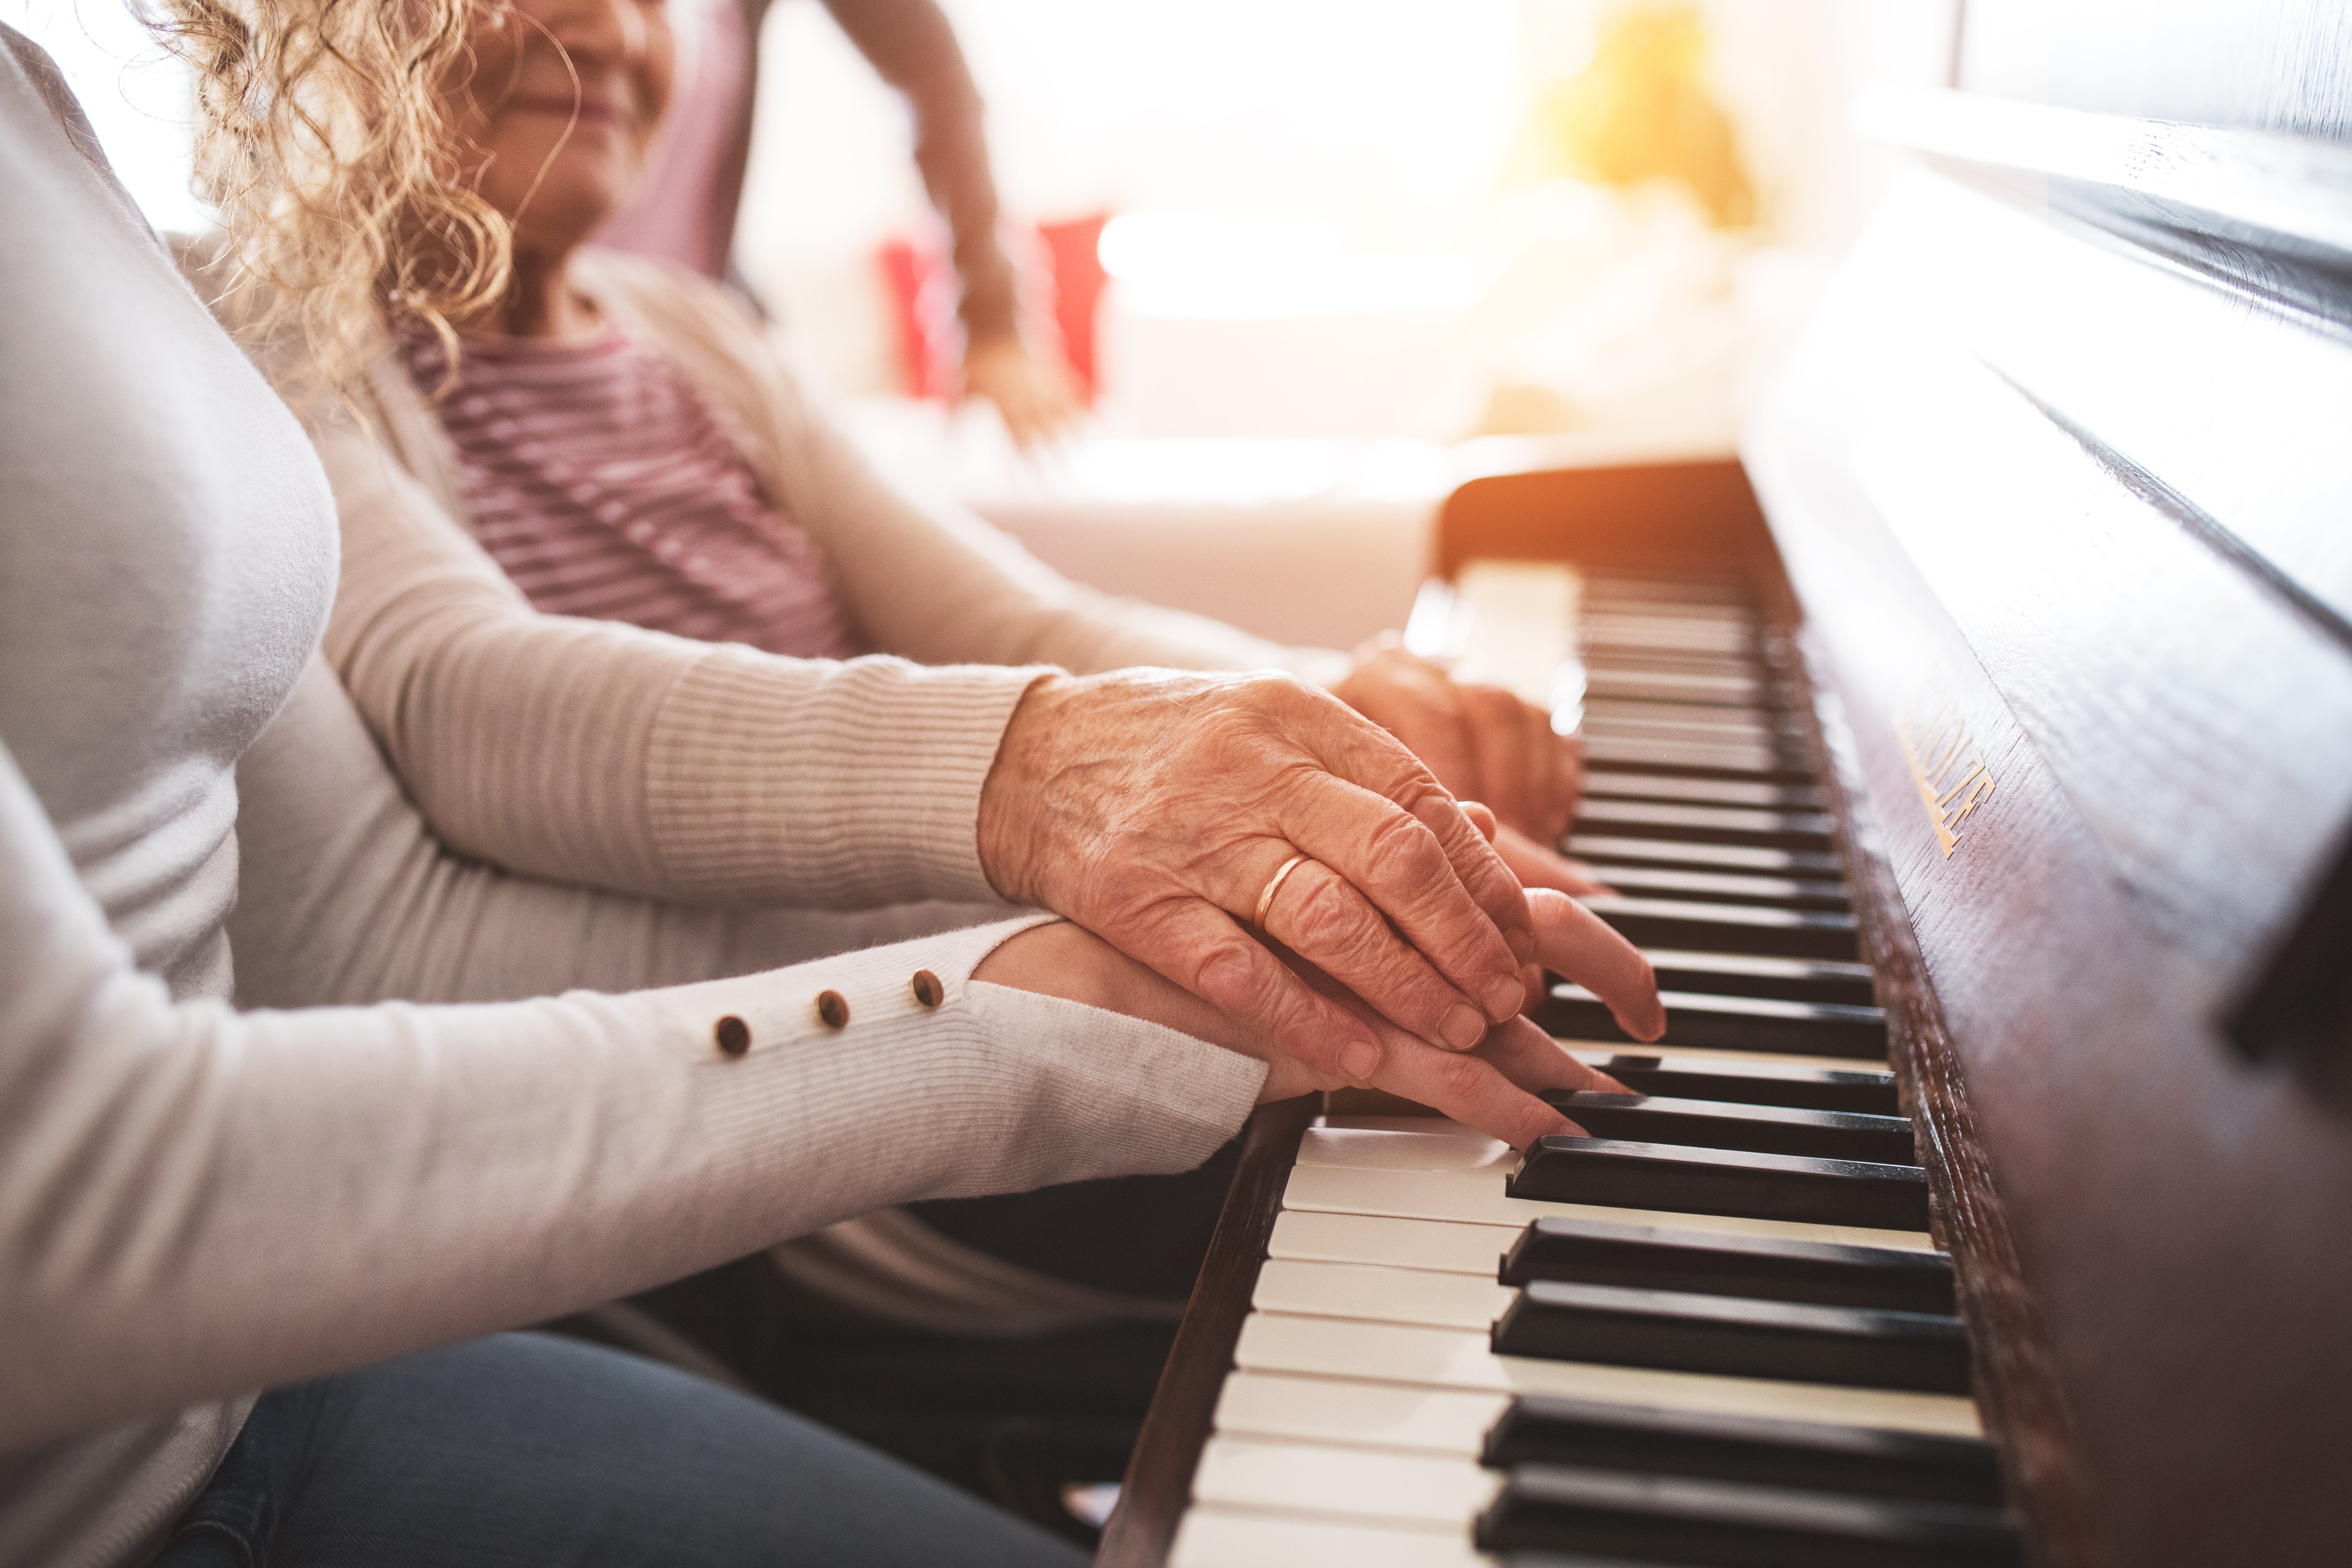 Hands of a young girl and an elderly woman playing they piano